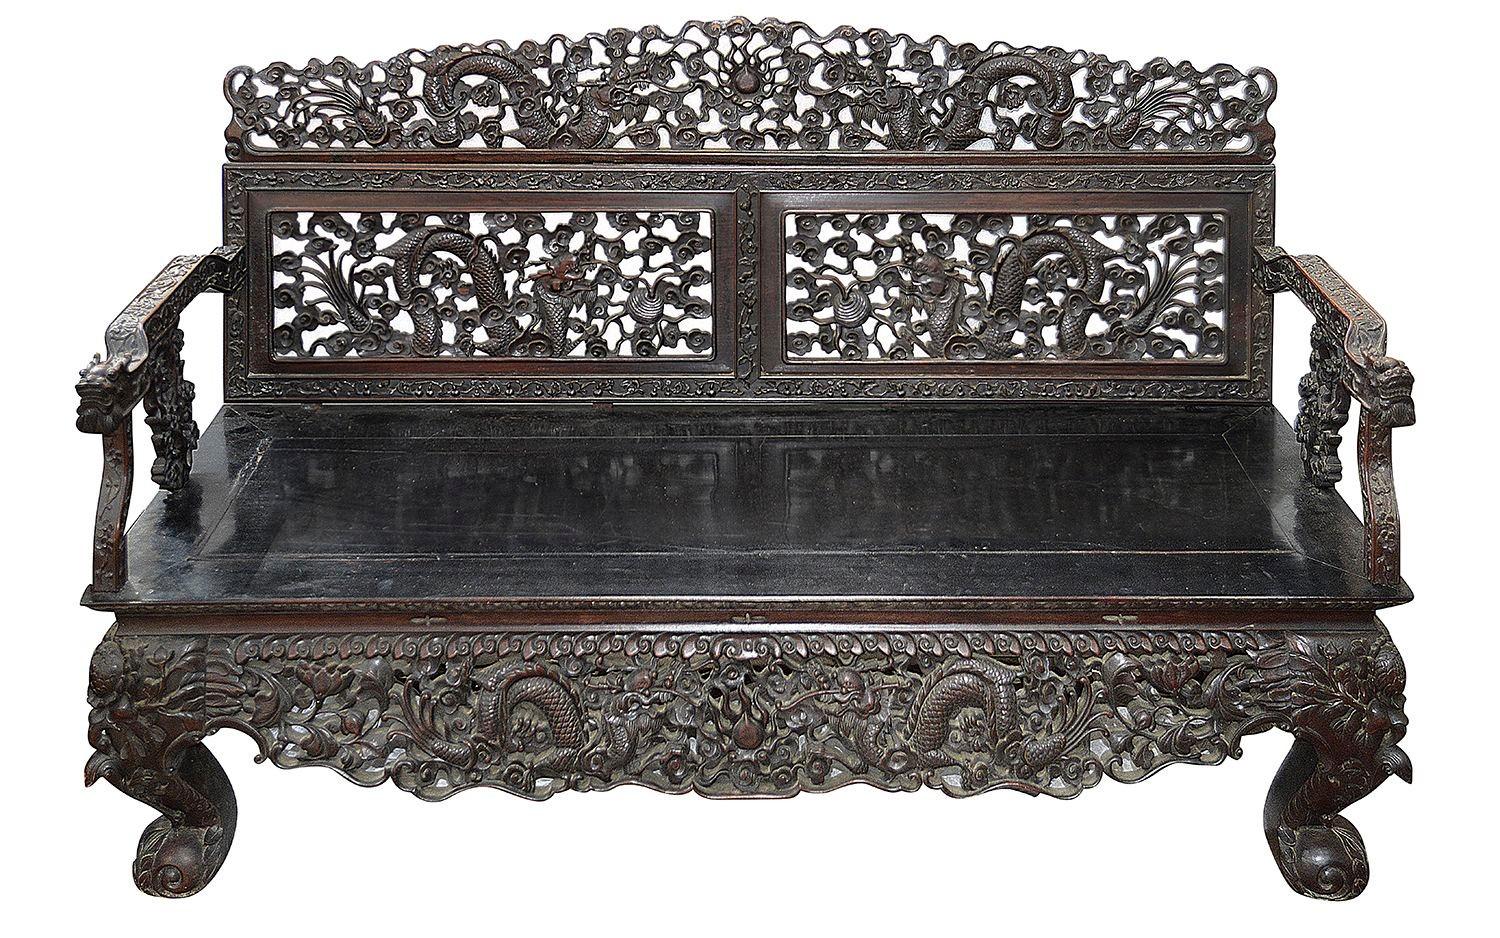 A very good quality 19th Century Chinese hardwood three seater sofa, having wonderful classical hand carved and pierced scrolling foliate decoration with Dragons entwined. The seat with inset panels and raised on carved claw feet.
 
Batch 69.